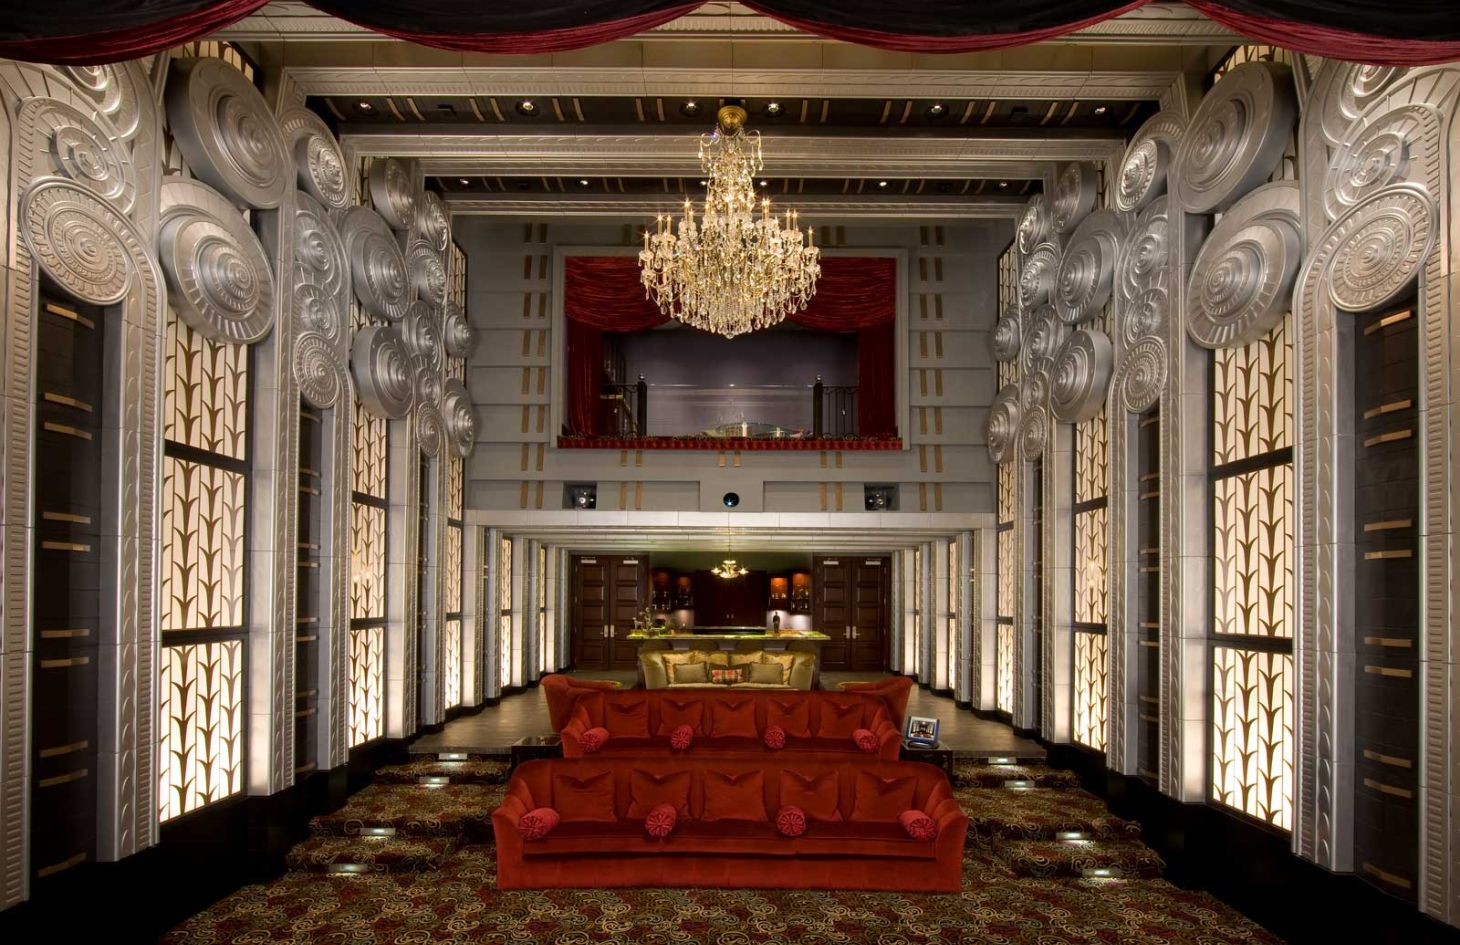 Ritzy Furniture, Traditional, Future Home Theater, Home Theater Installation, Details